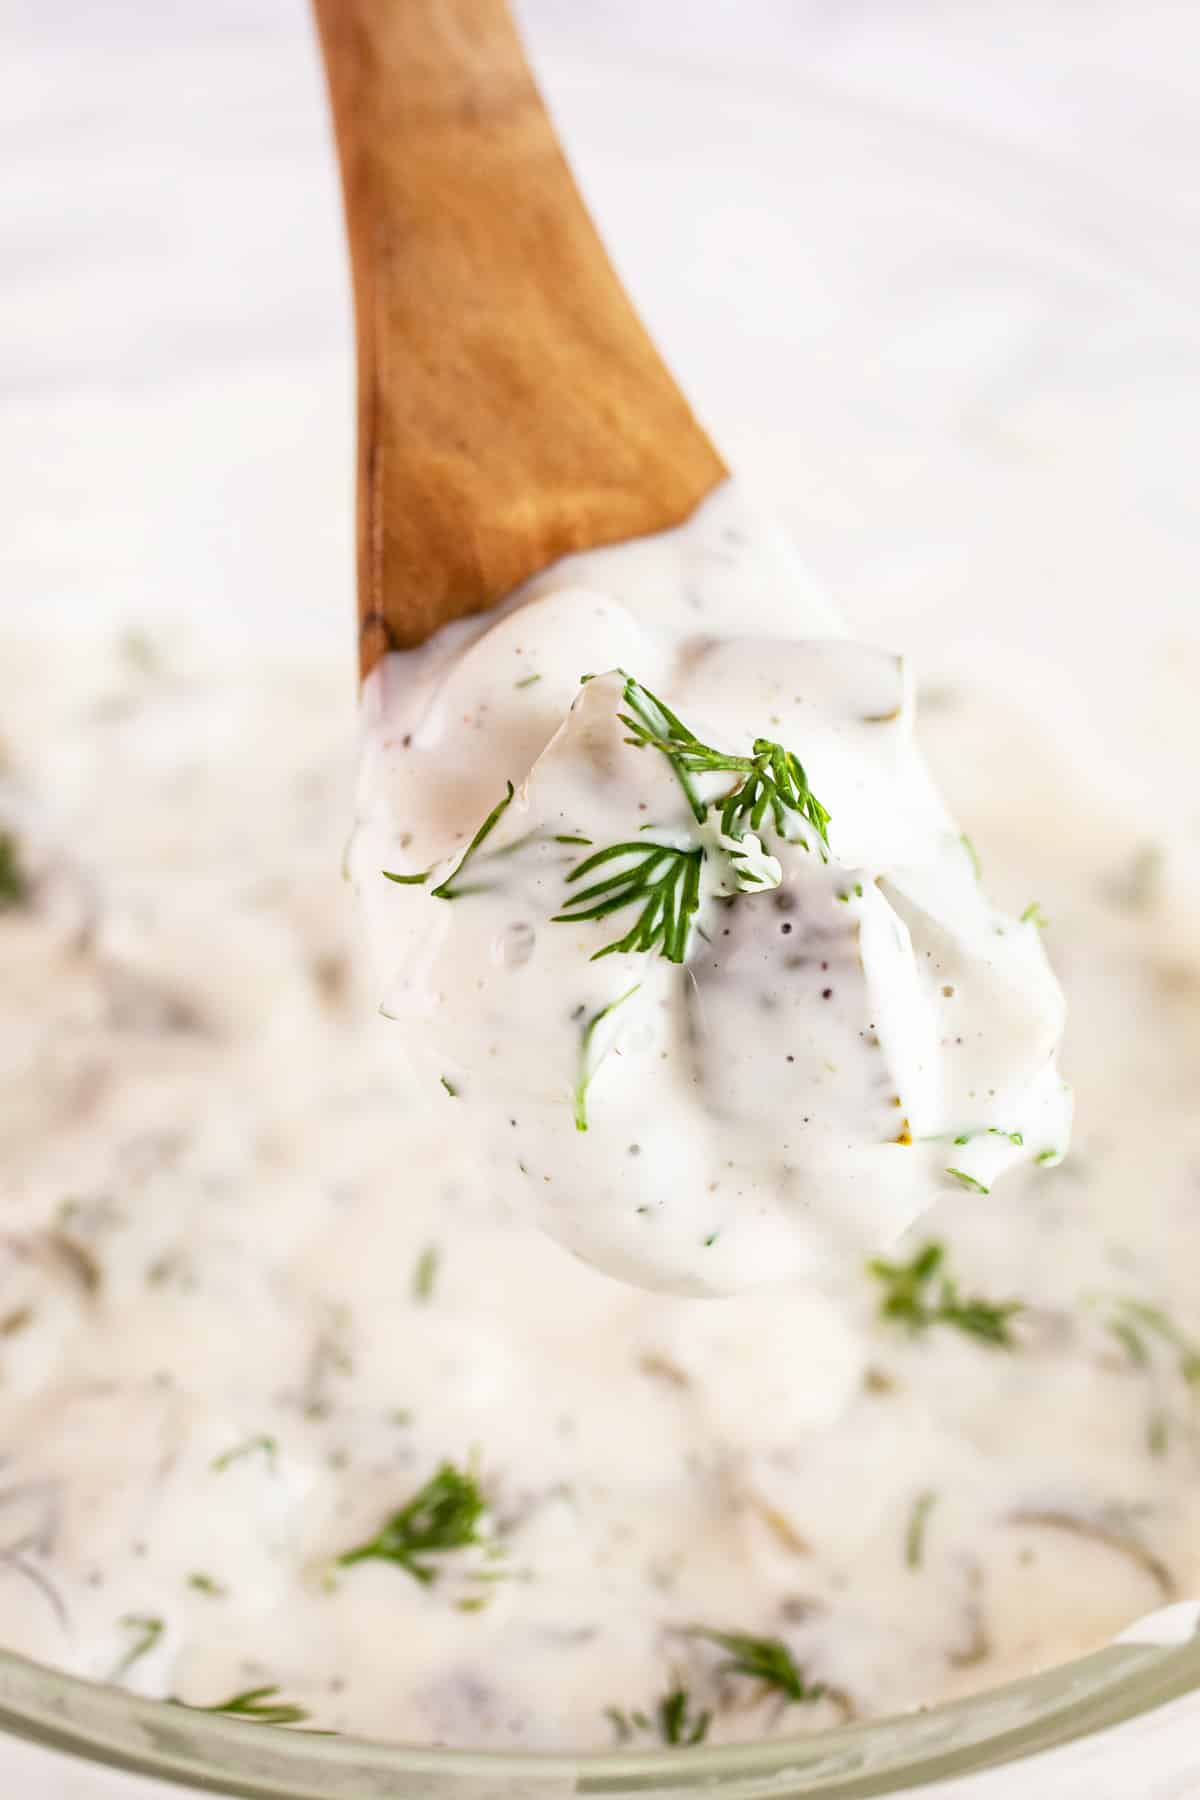 Wooden spoonful of dill tartar sauce lifted from small glass bowl.